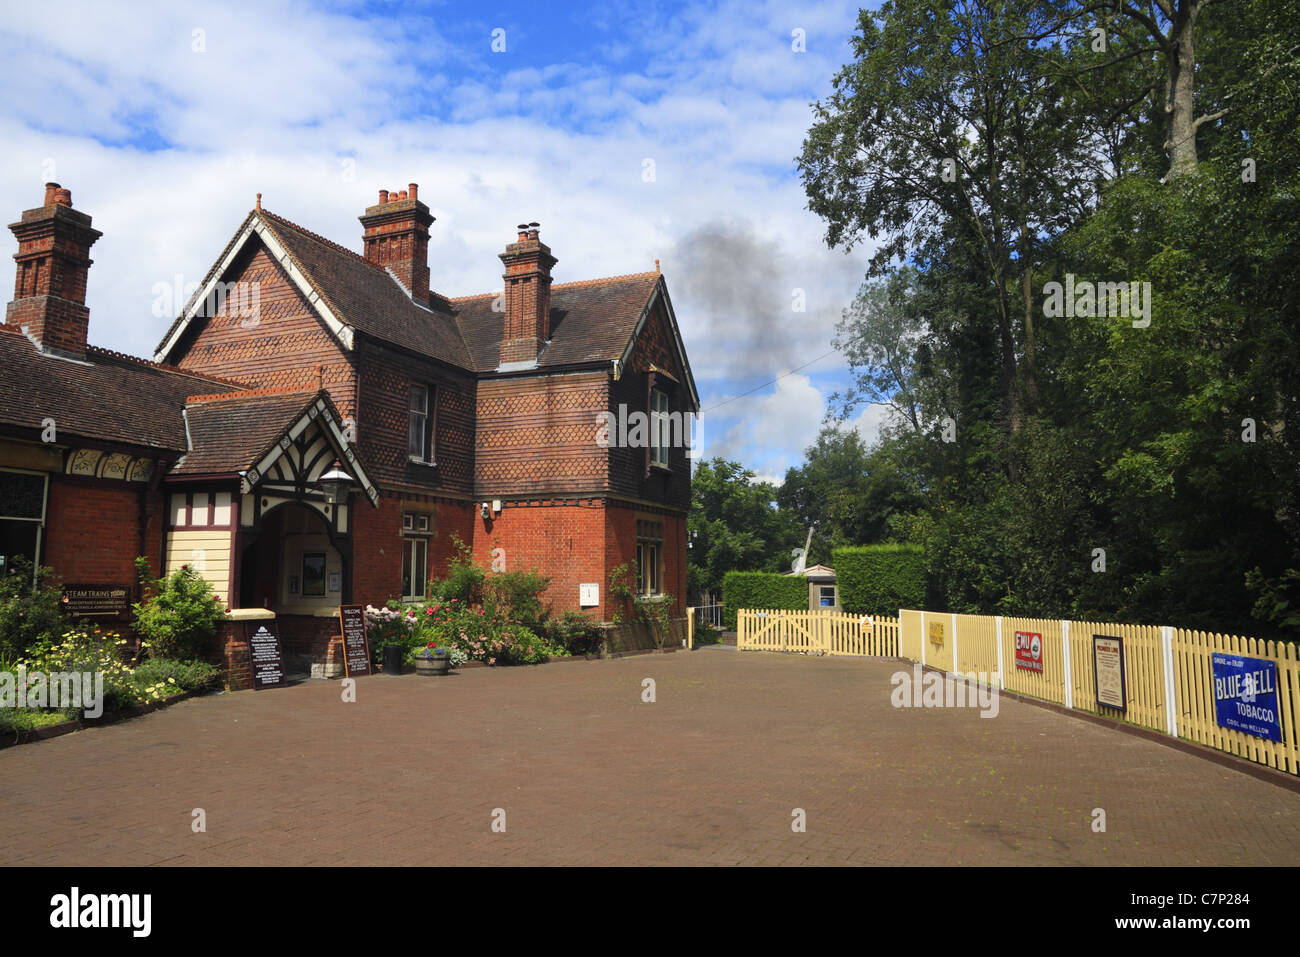 The entrance to the station building at The Bluebell Line Steam Railway, Sheffield park, West Sussex, England. Stock Photo